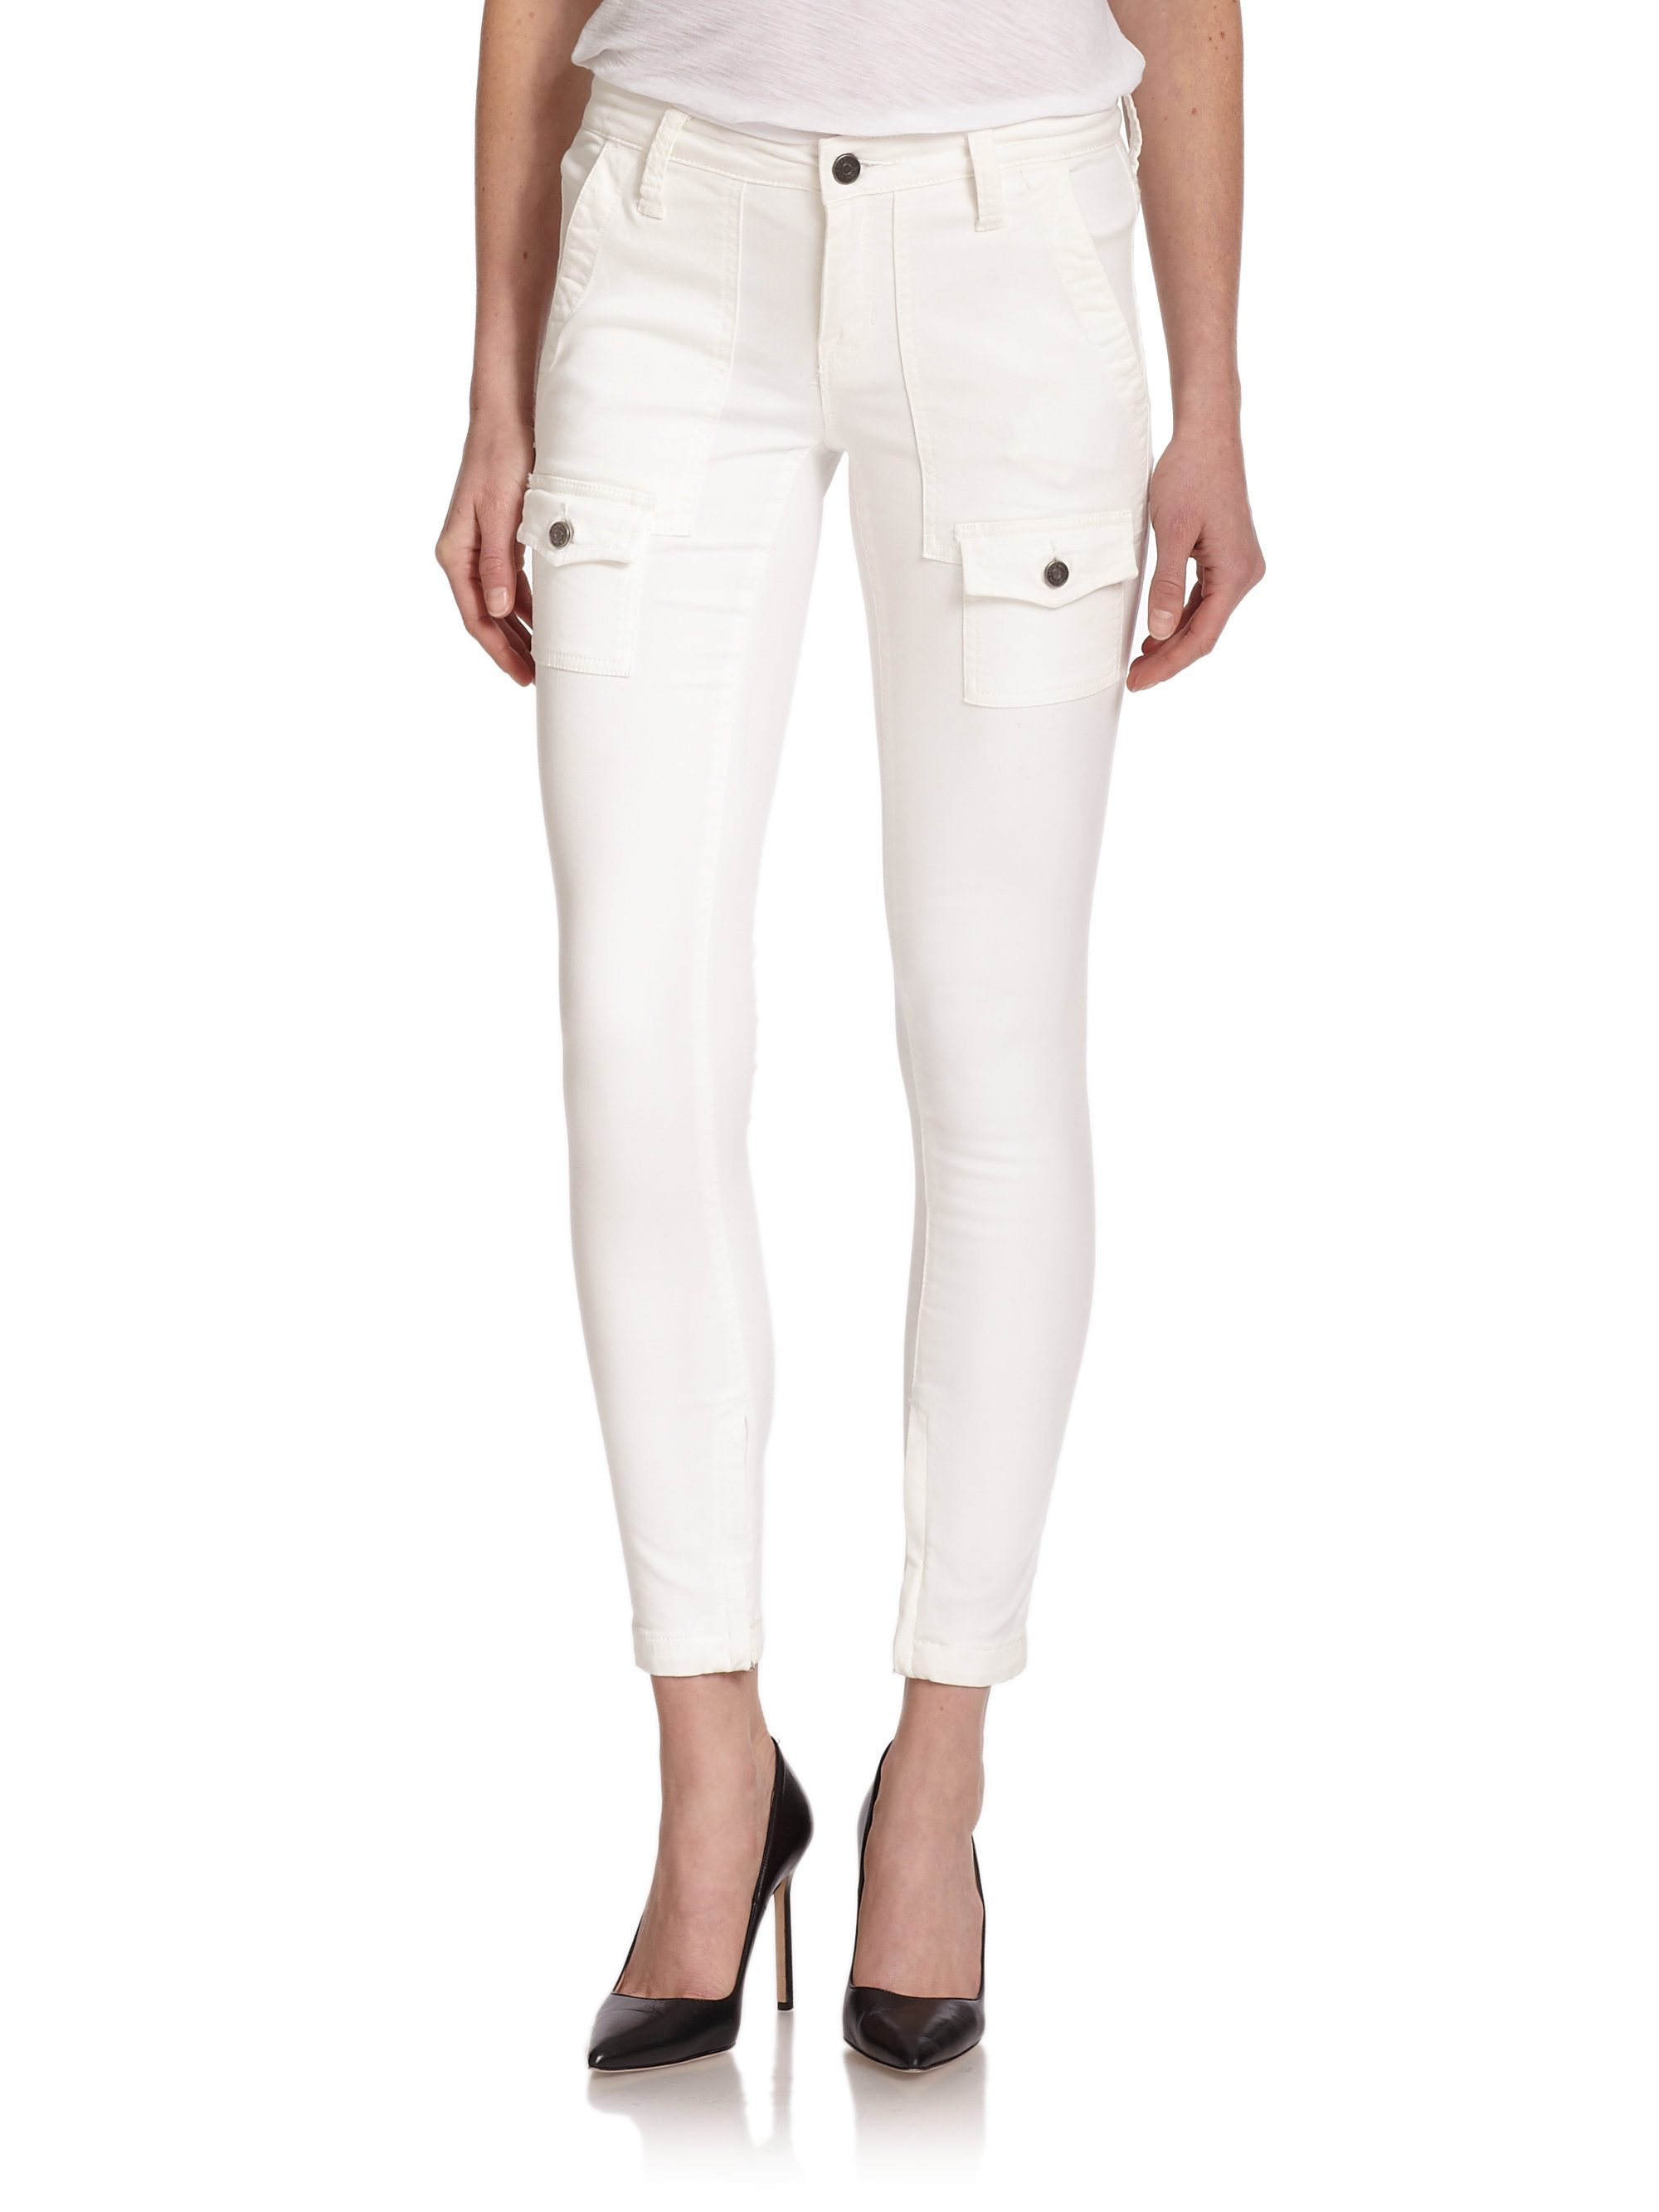 Joie Cotton So Real Skinny Cargo Pants in White - Lyst